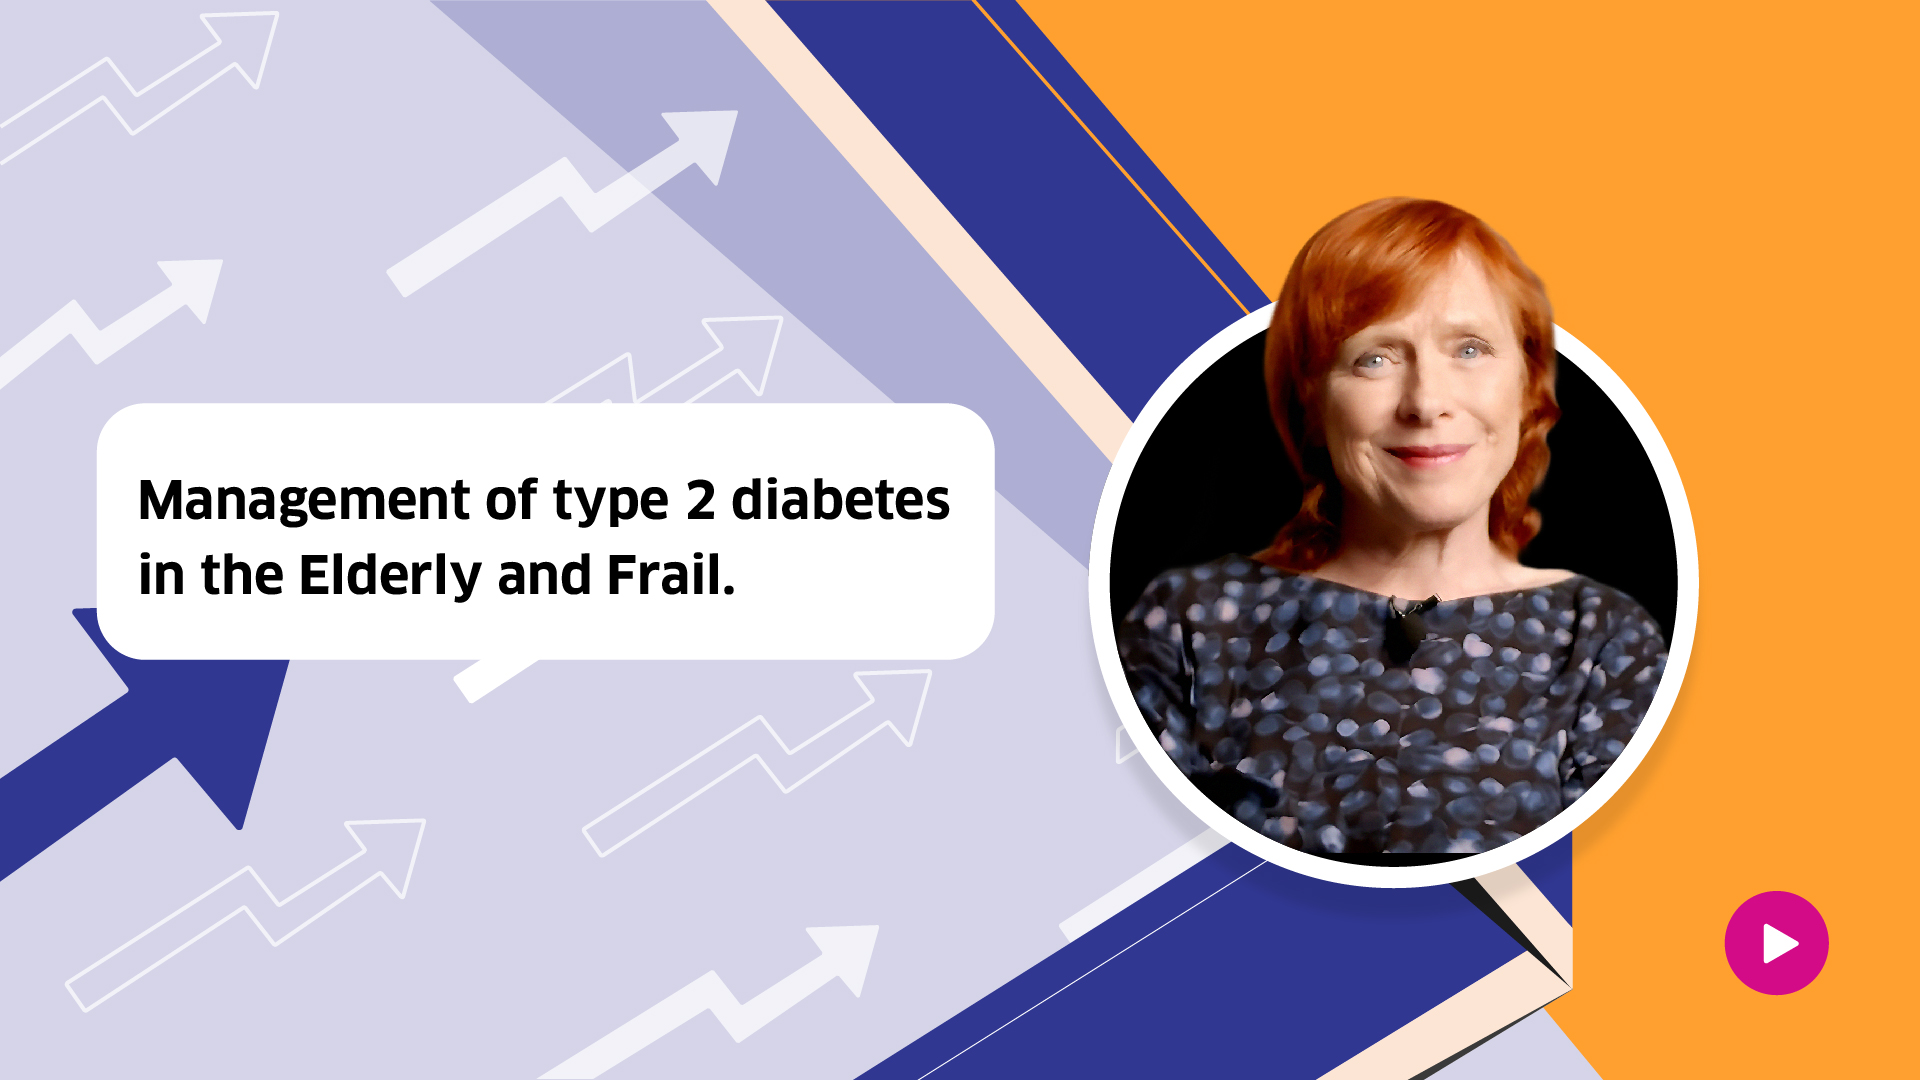 Management of type 2 diabetes in the elderly and frail